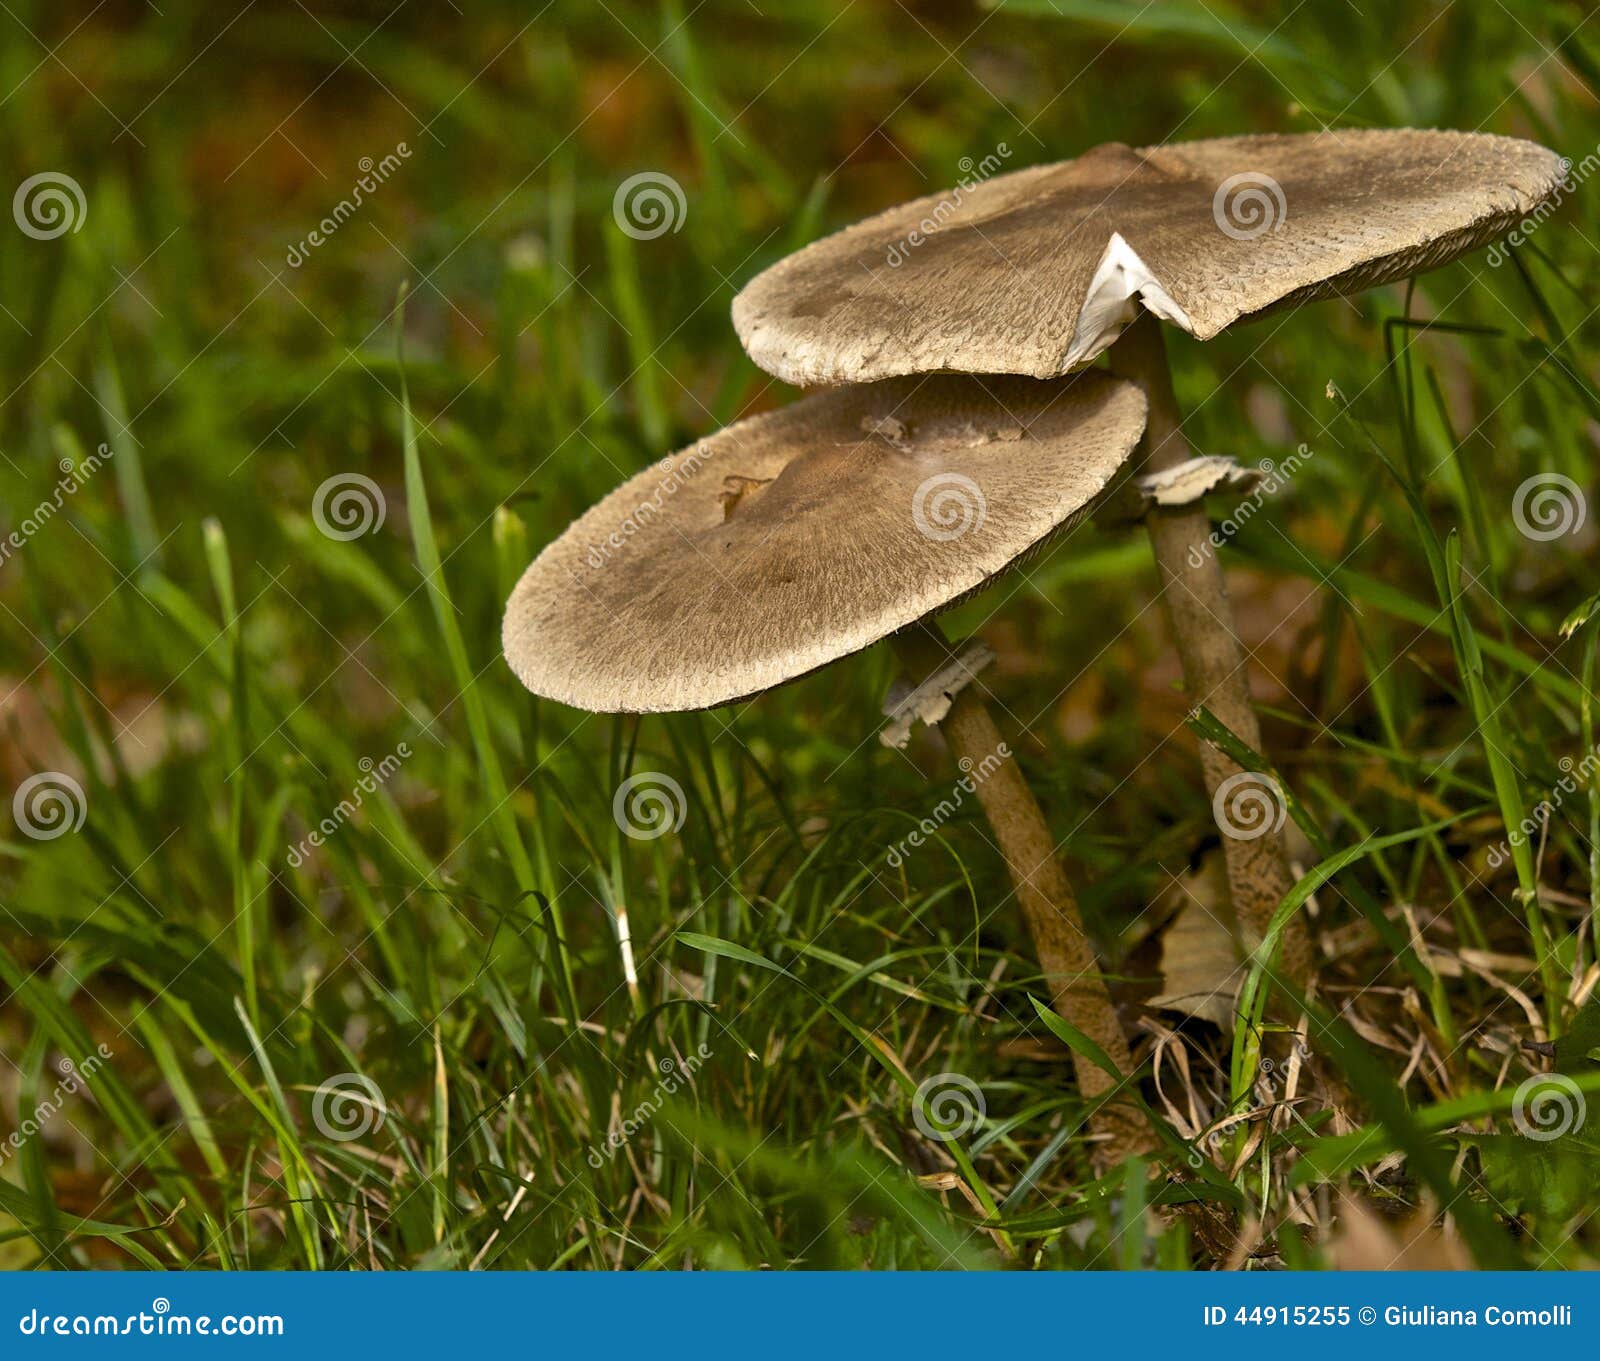 Mushrooms at the Edge of the Forest Stock Image - Image of vulgaris ...